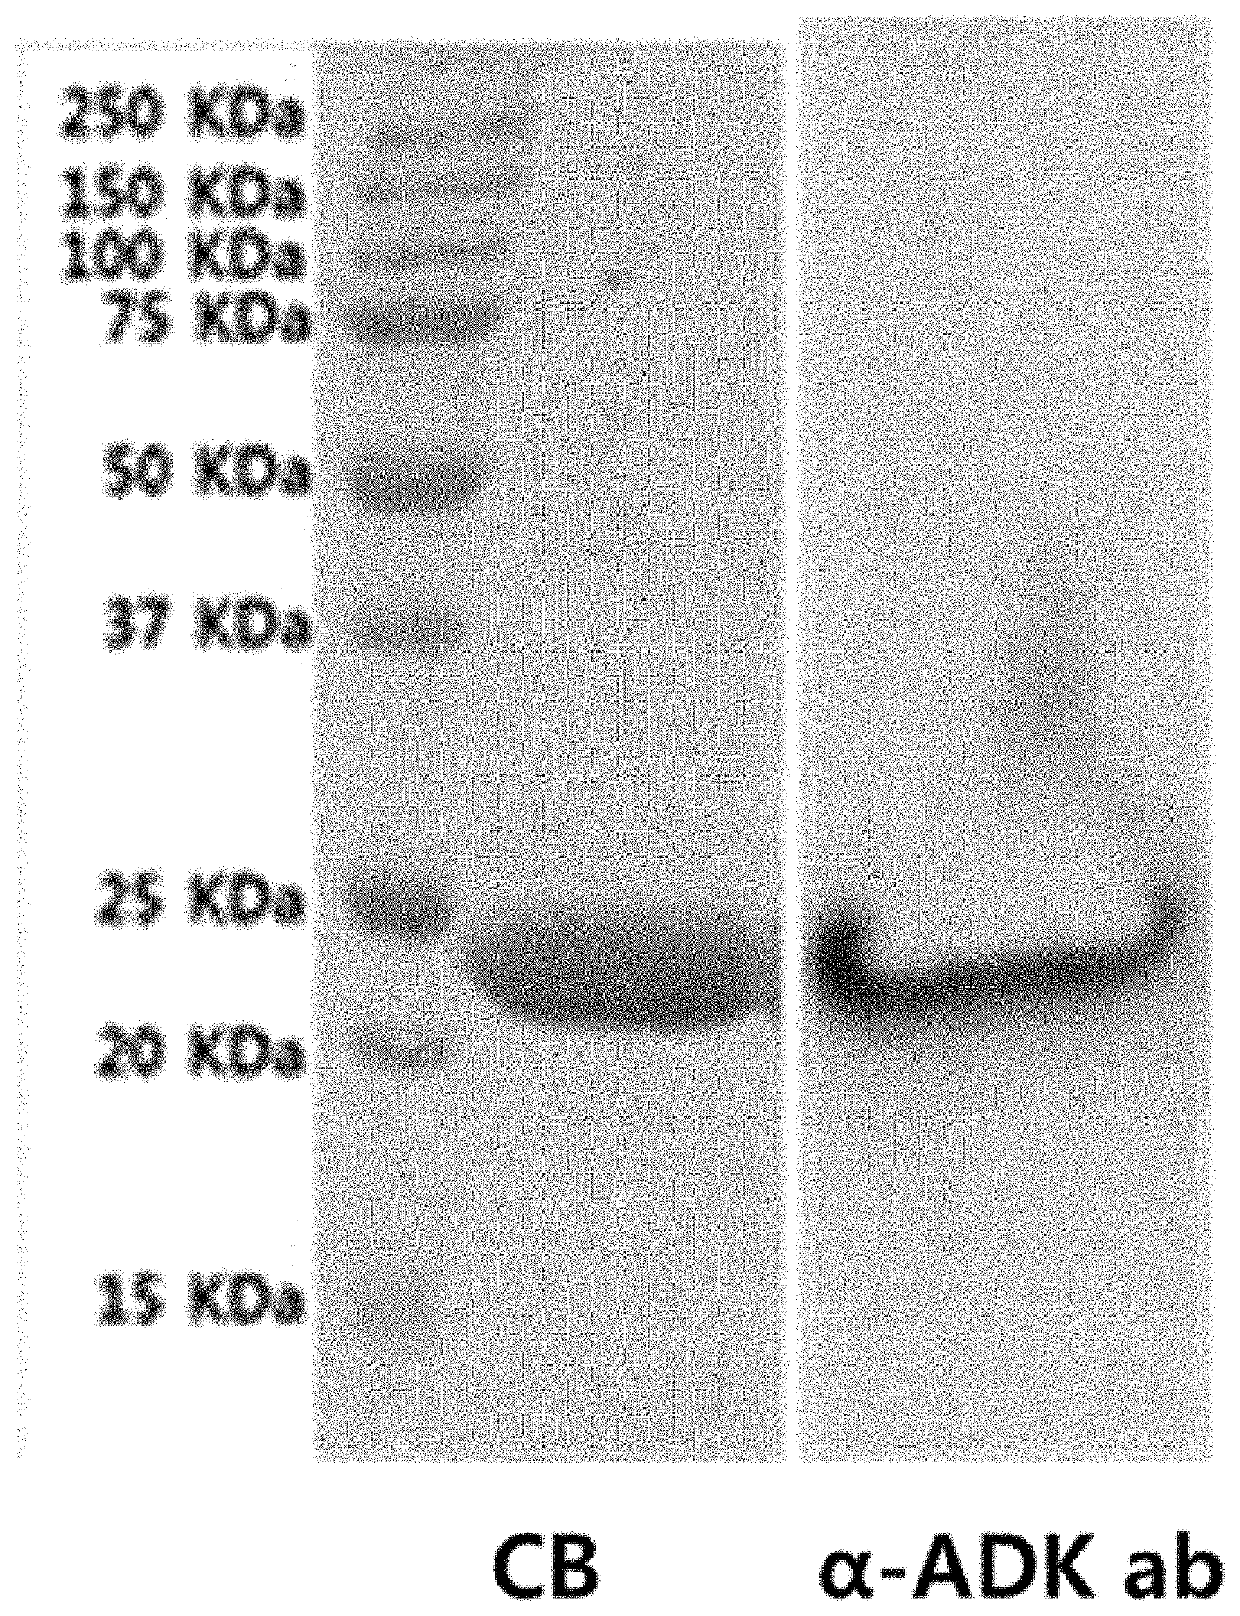 Antibacterial composition for combating carbapenem-resistant gram-negative bacteria comprising ADK protein as active ingredient